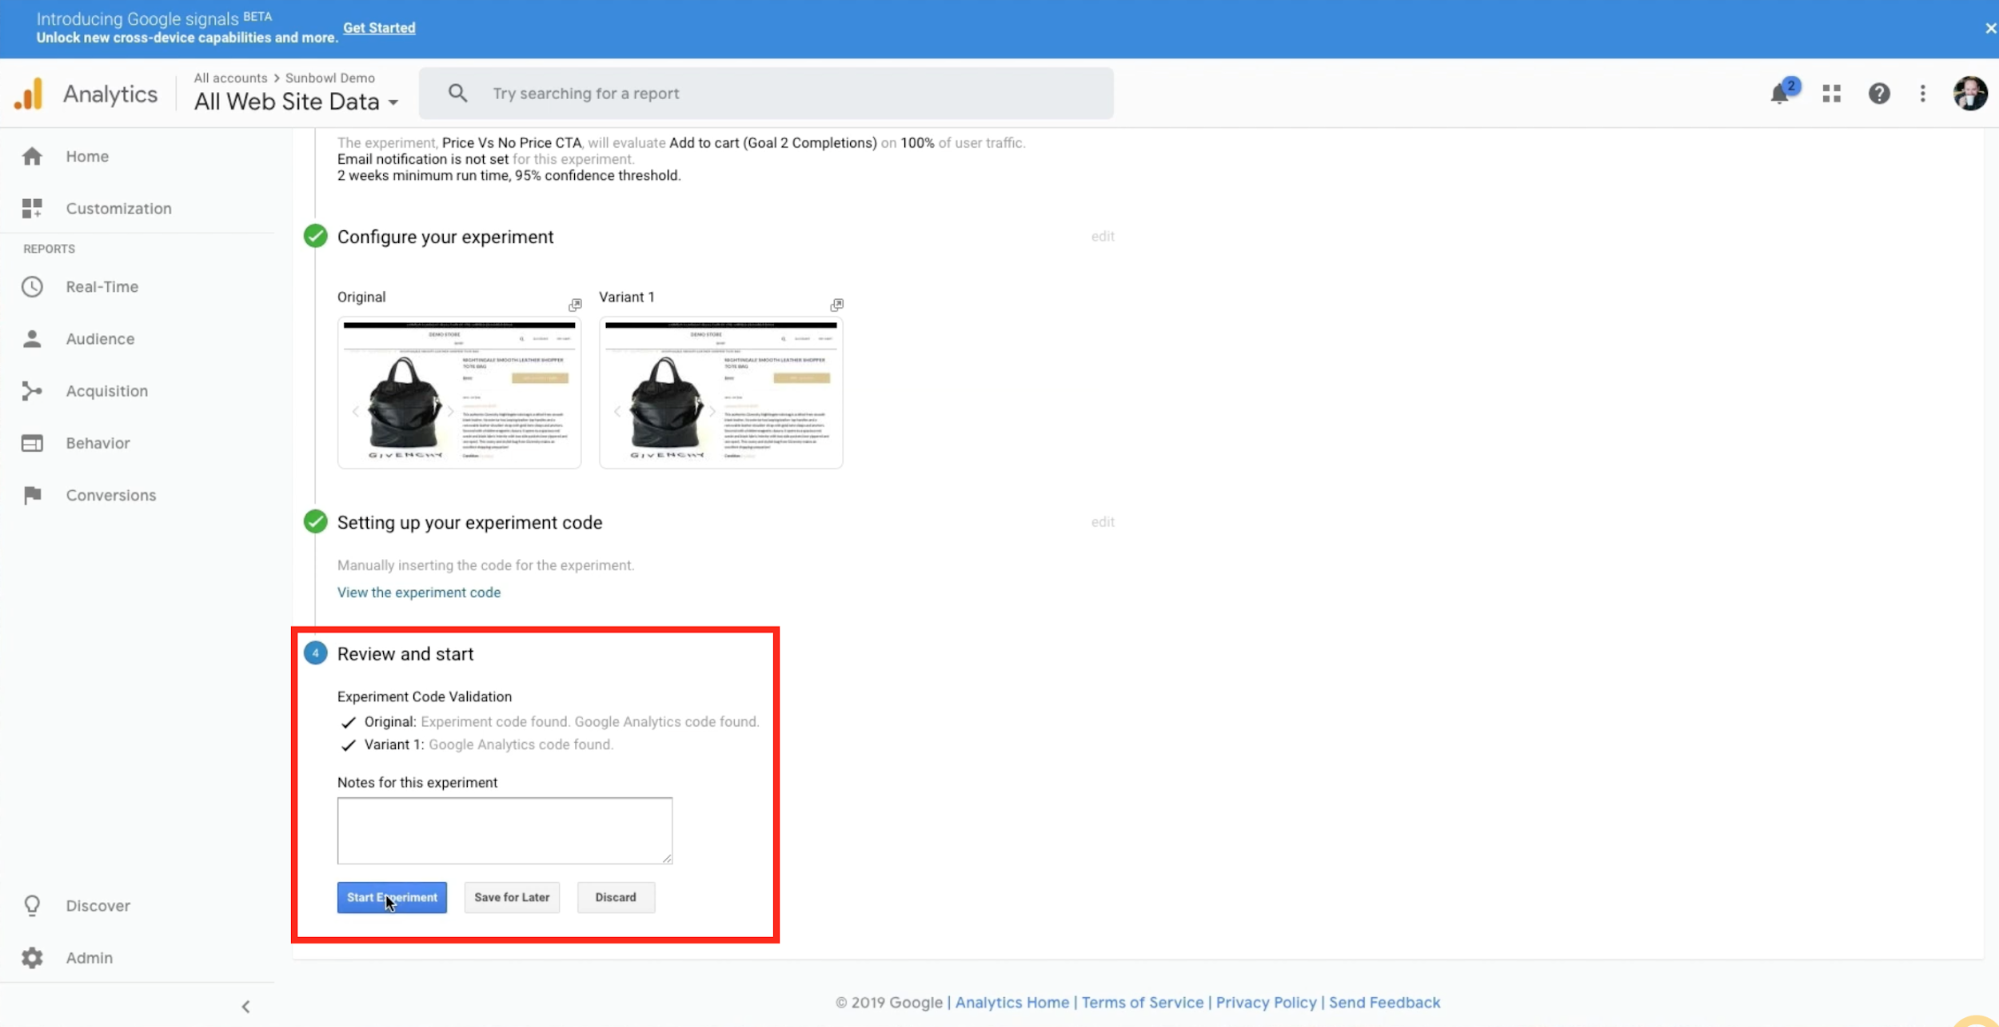 Google analytics is verifying it sees the code and that it is working on the merchants Shopify store